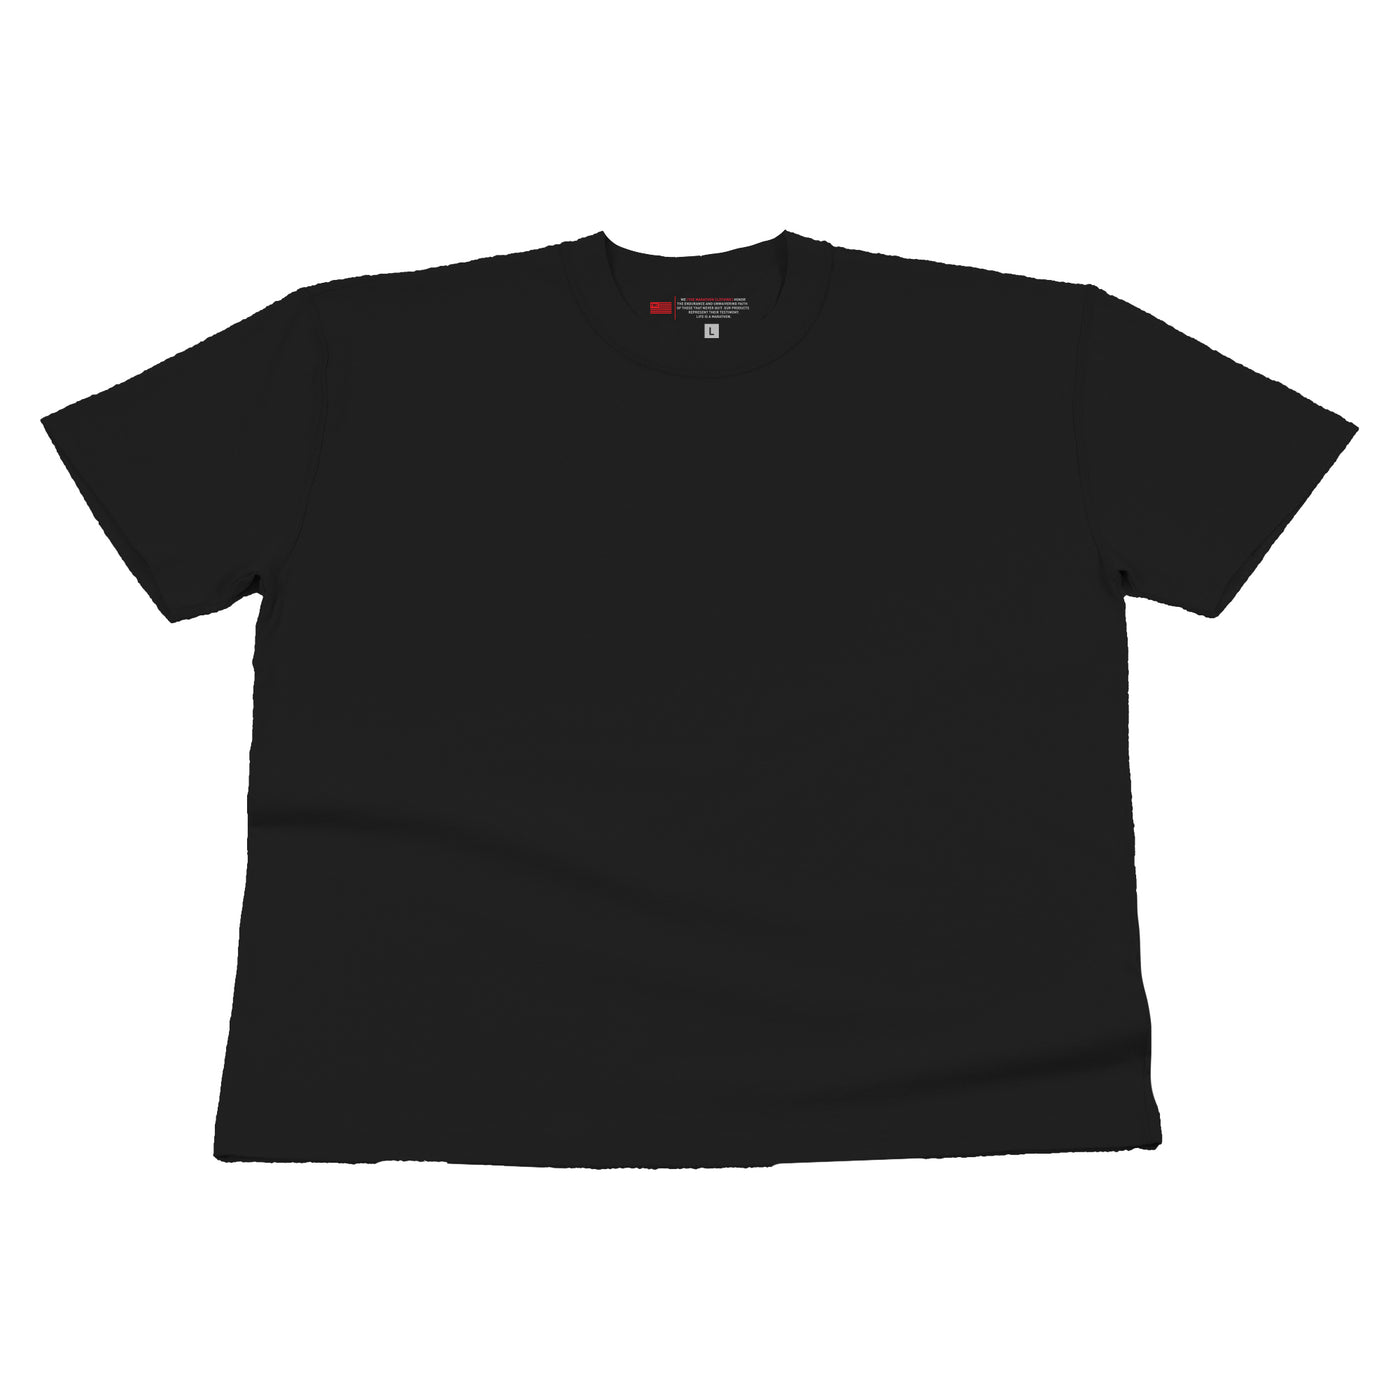 Limited Edition (Ultra) T-Shirt - Black - Front